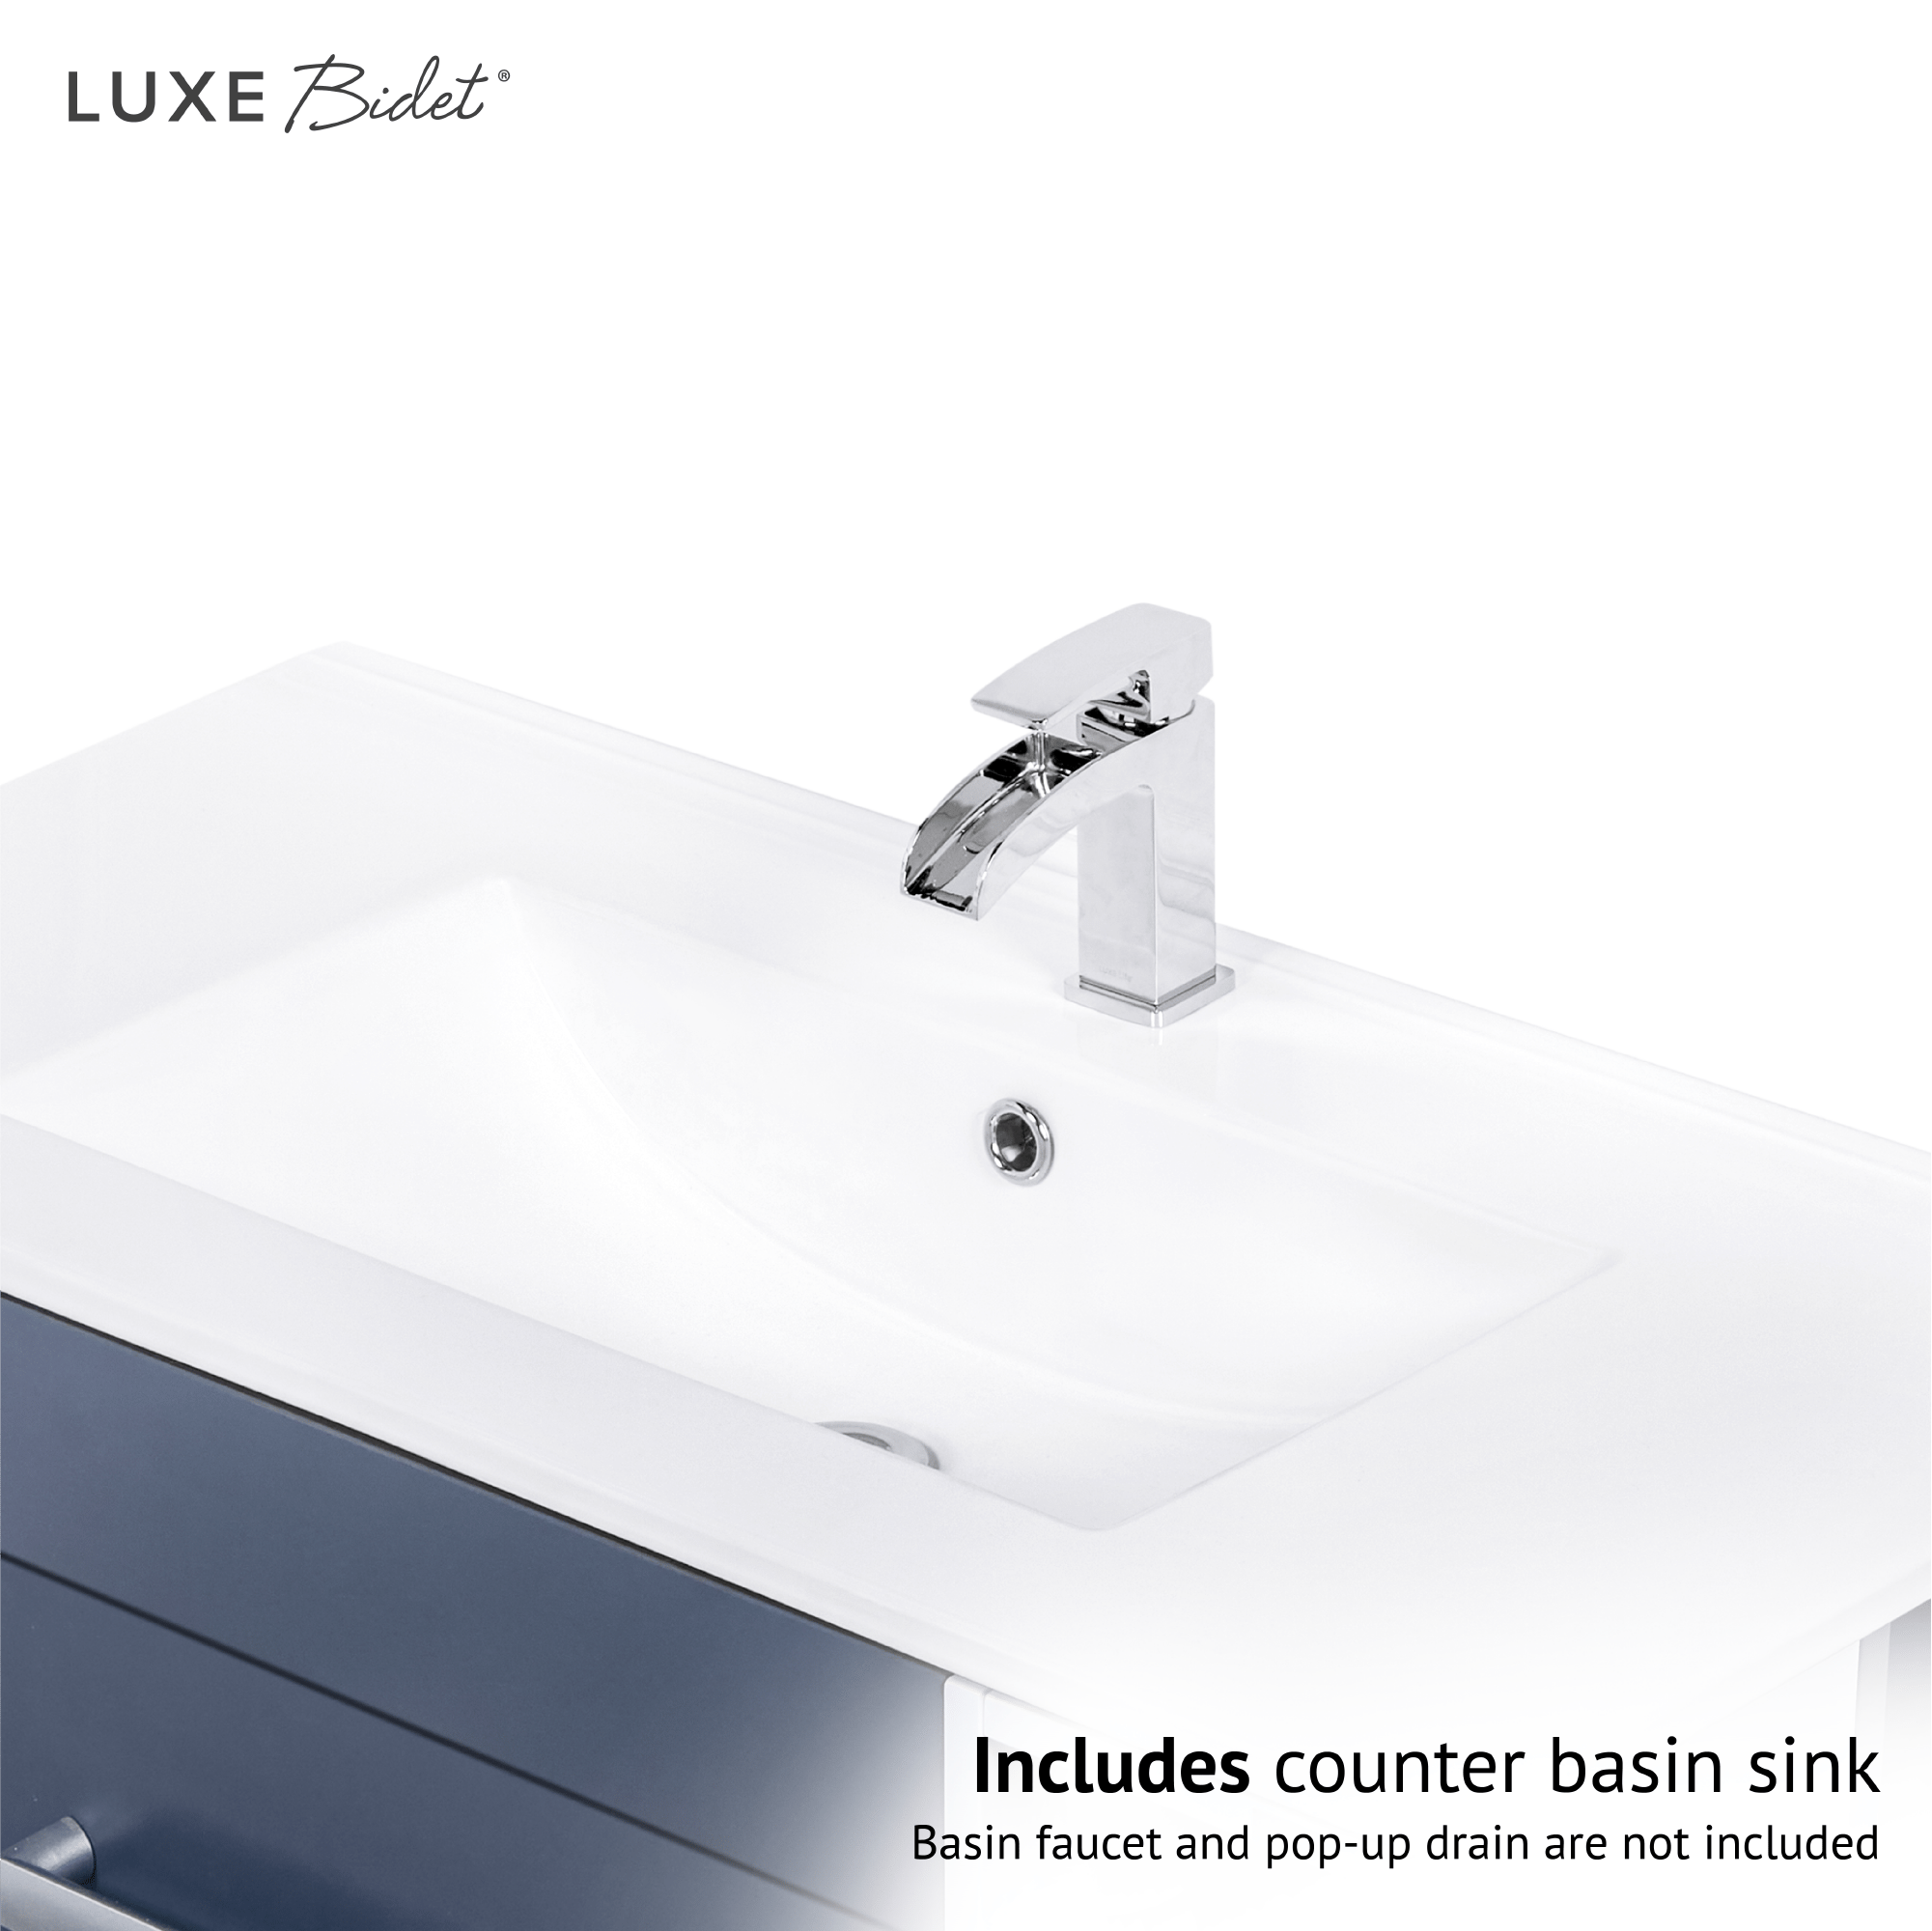 Kyro Bathroom Vanity Set includes counter basin sink, basin faucet and pop-up drain are not included